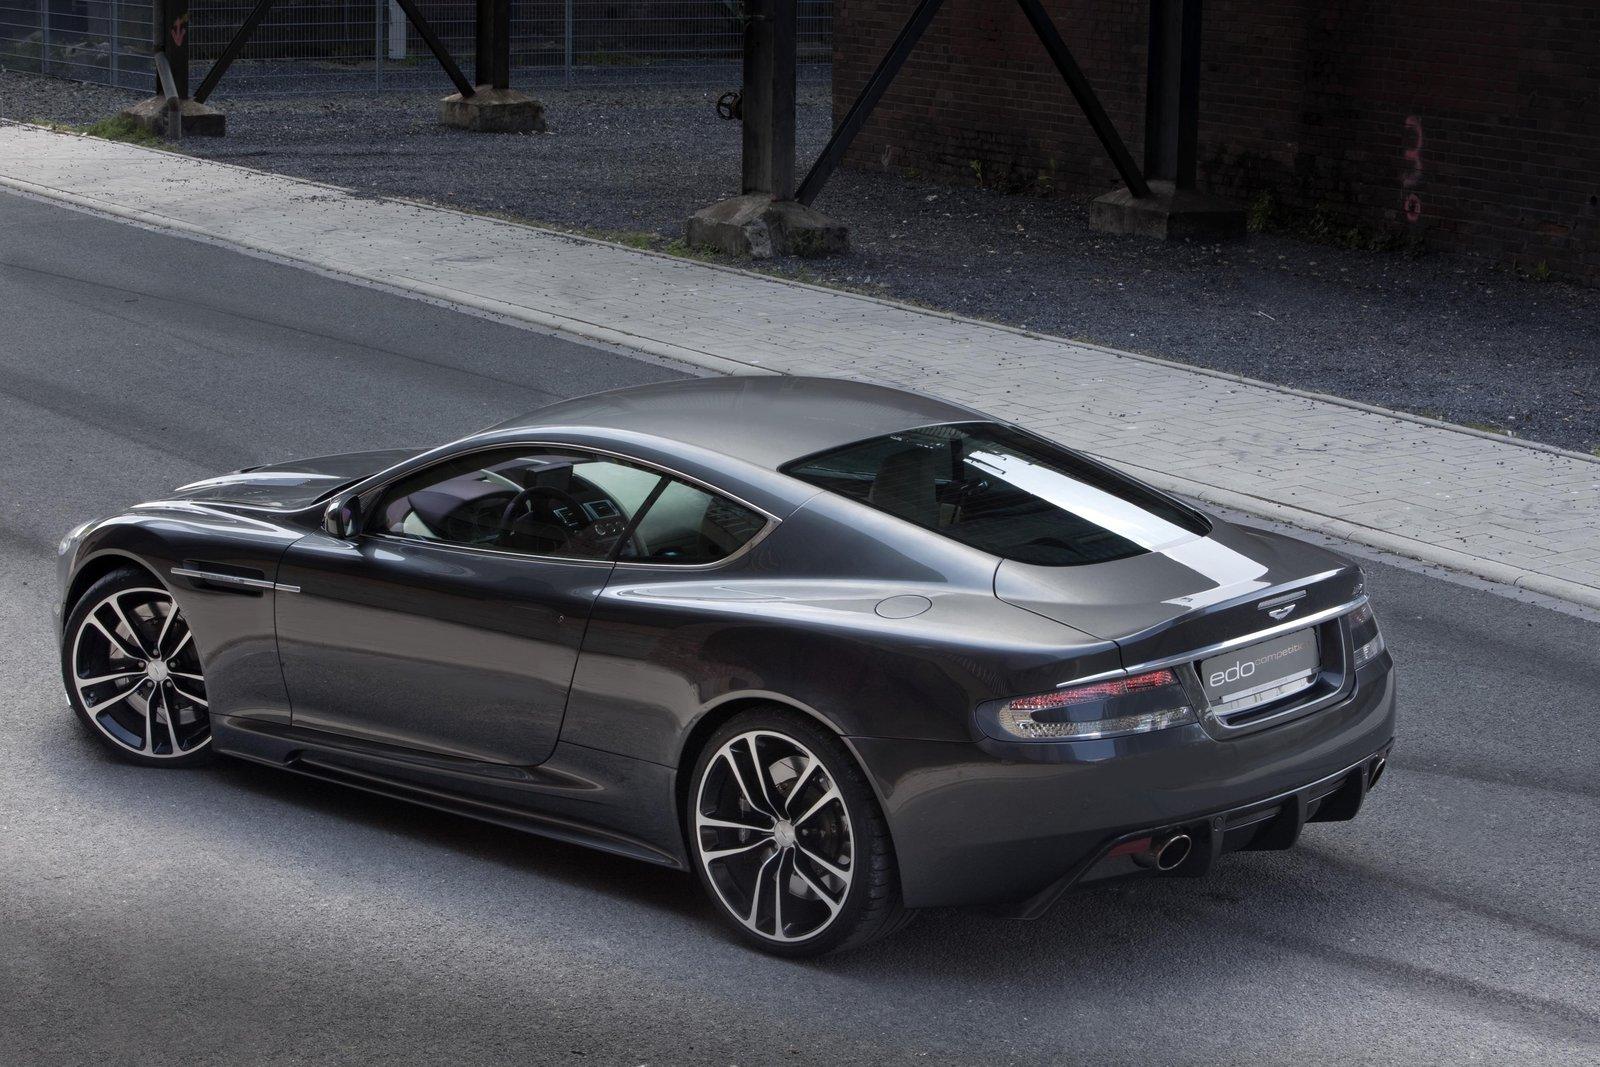 Cars Pictures Gallery: Aston Martin DB9